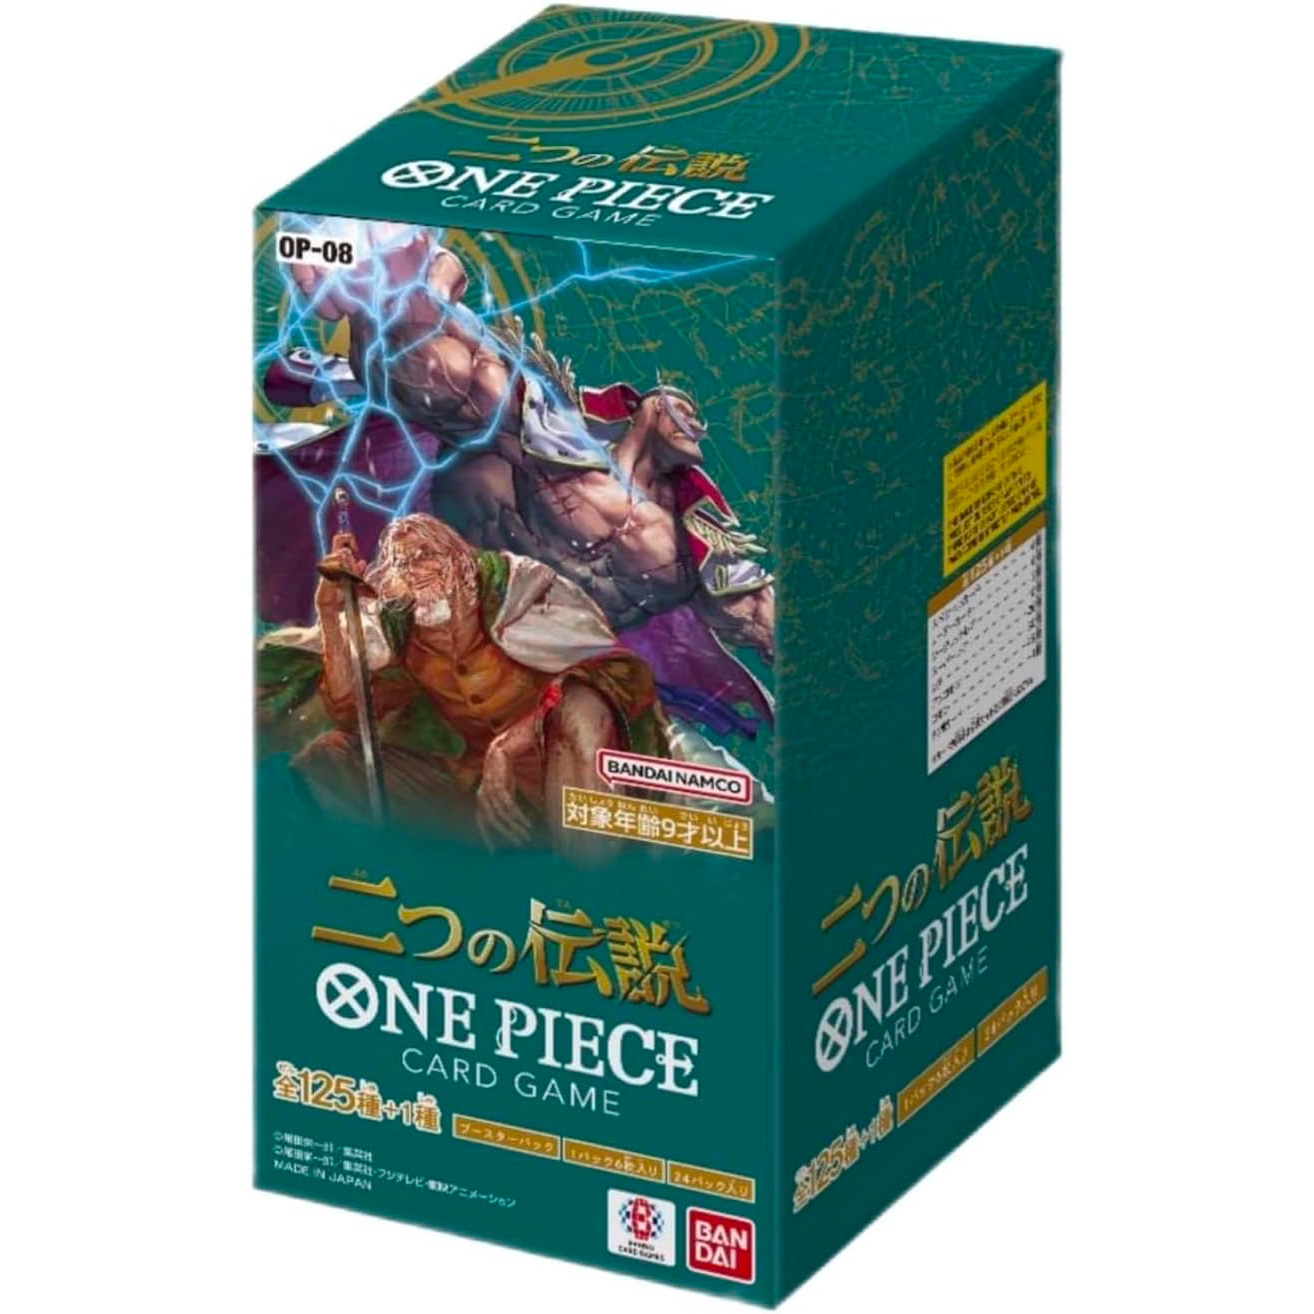 [OP-08] ONE PIECE CARD GAME Booster Pack ｢Two Legends｣ Box